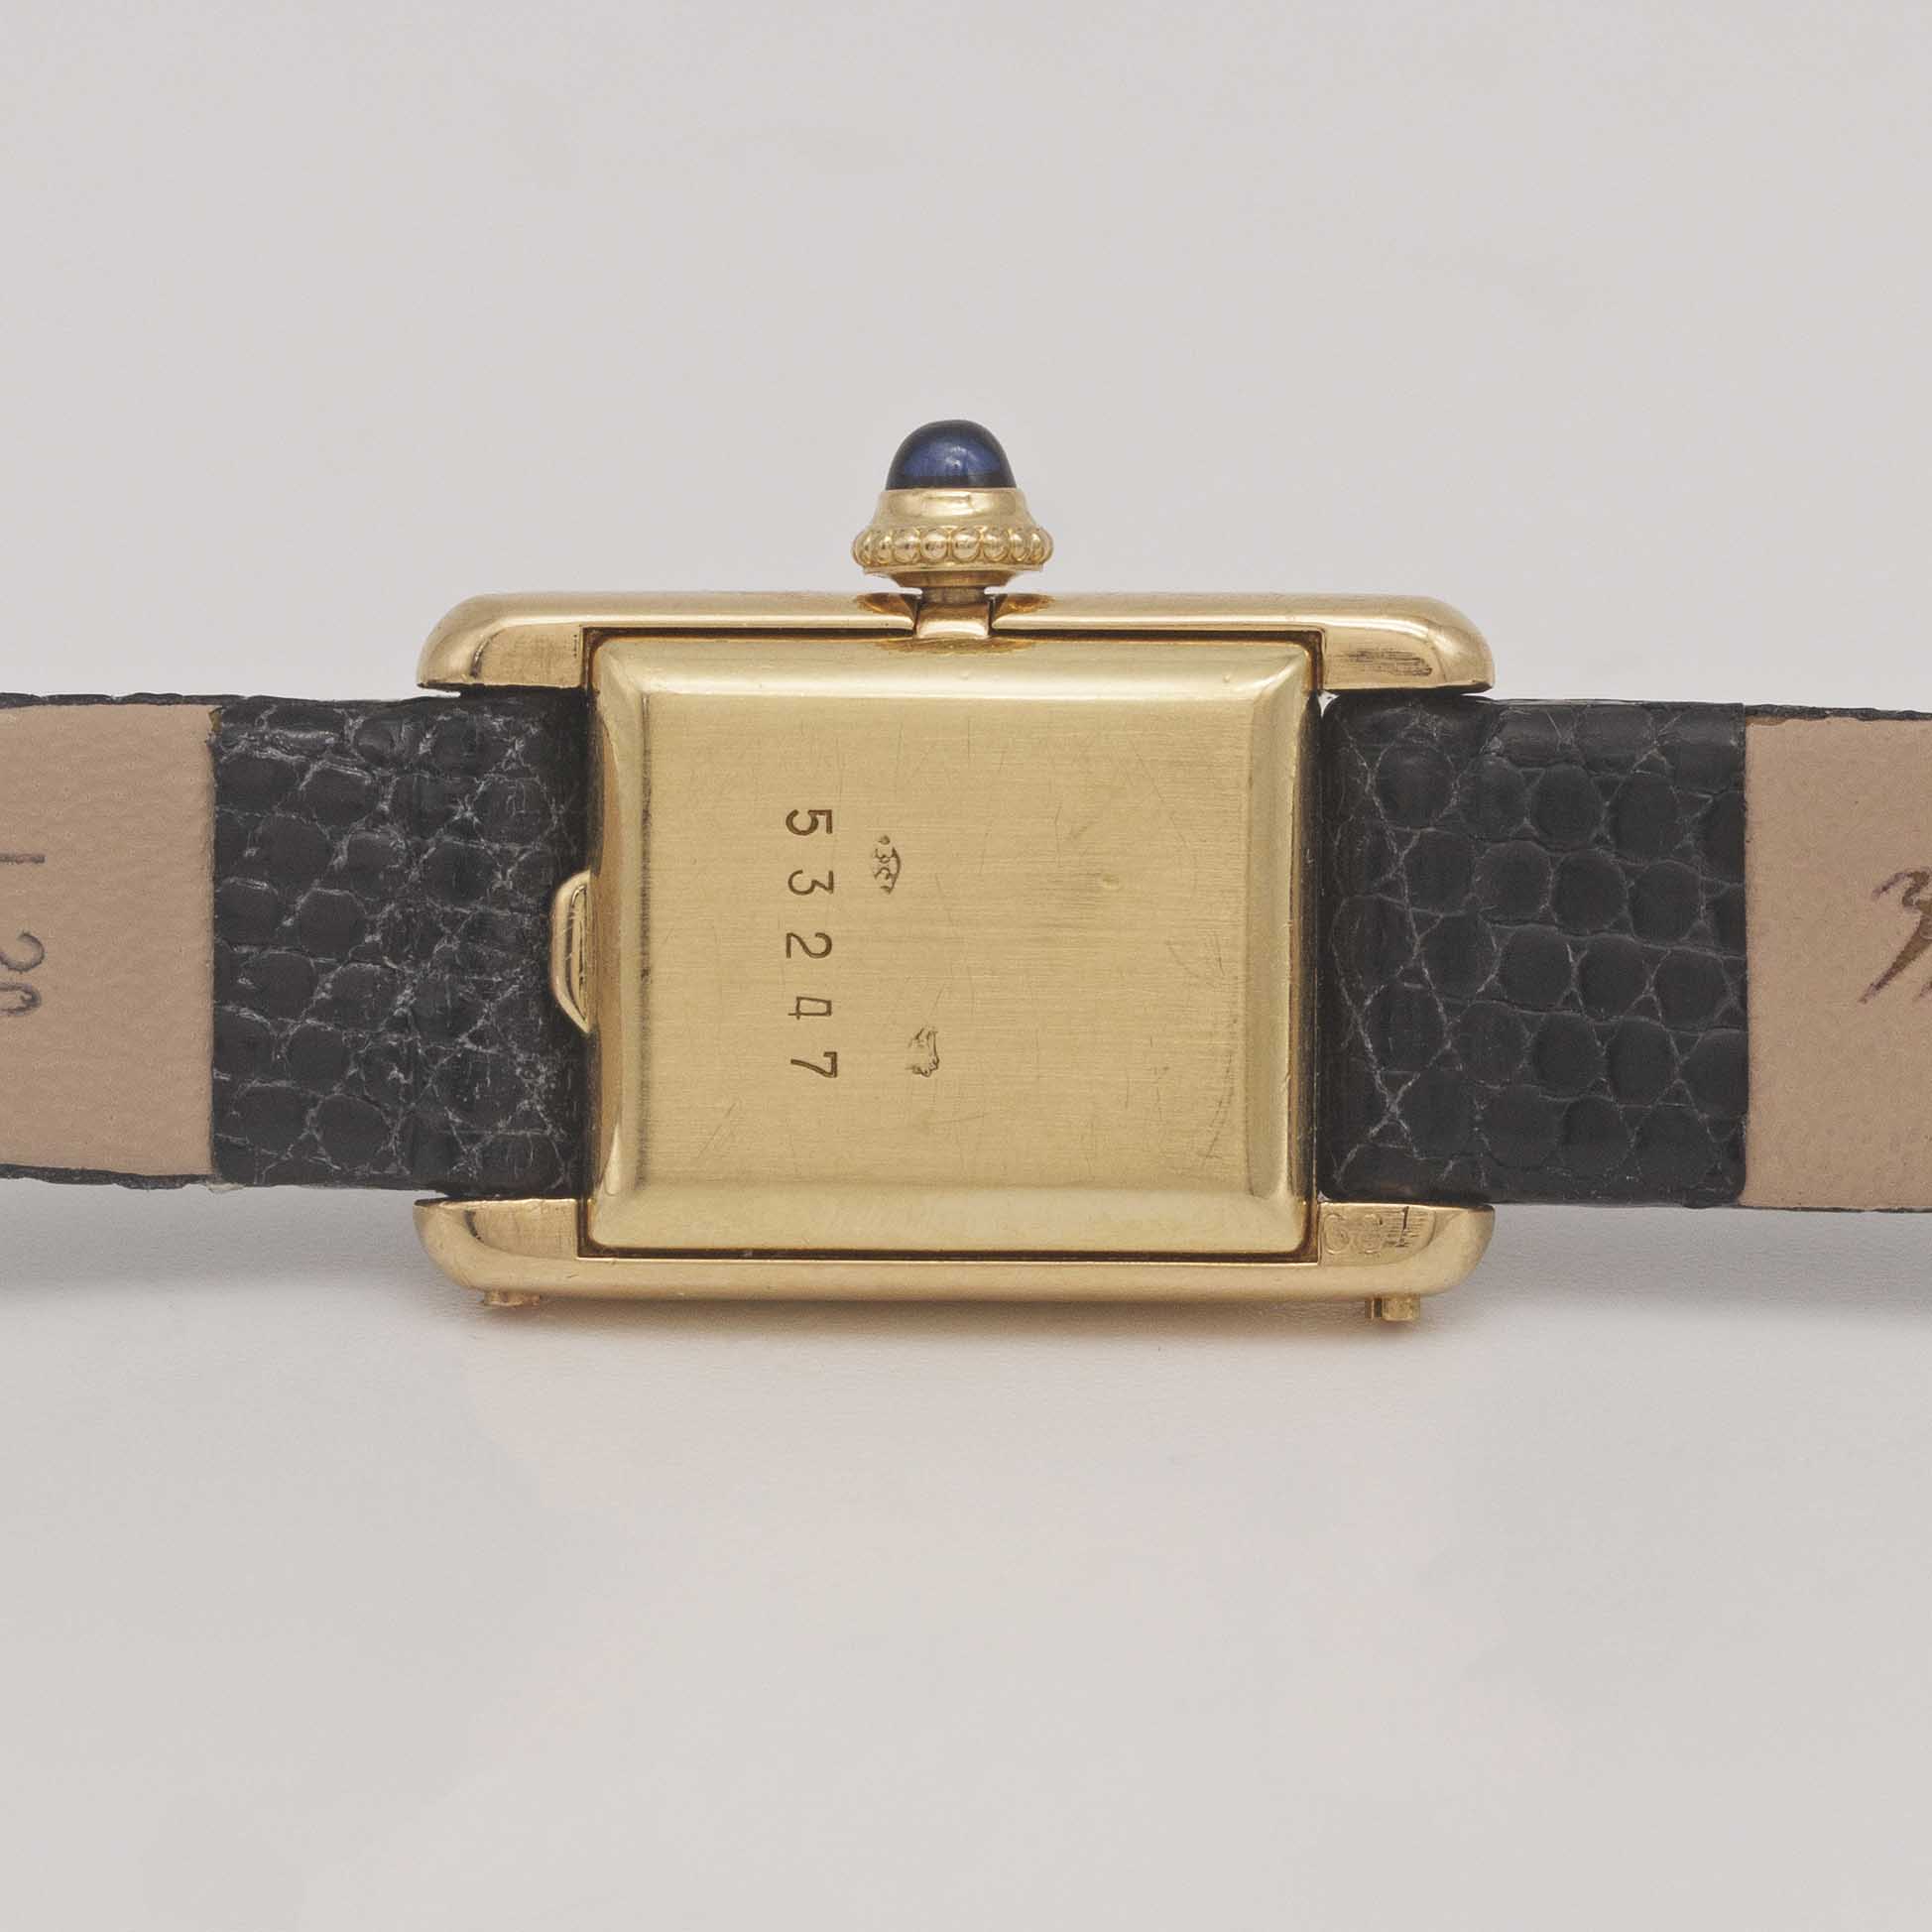 A LADIES 18K SOLID GOLD CARTIER PARIS "MINI" TANK WRIST WATCH CIRCA 1970s, WITH MANUAL WIND CAL. 845 - Image 6 of 11